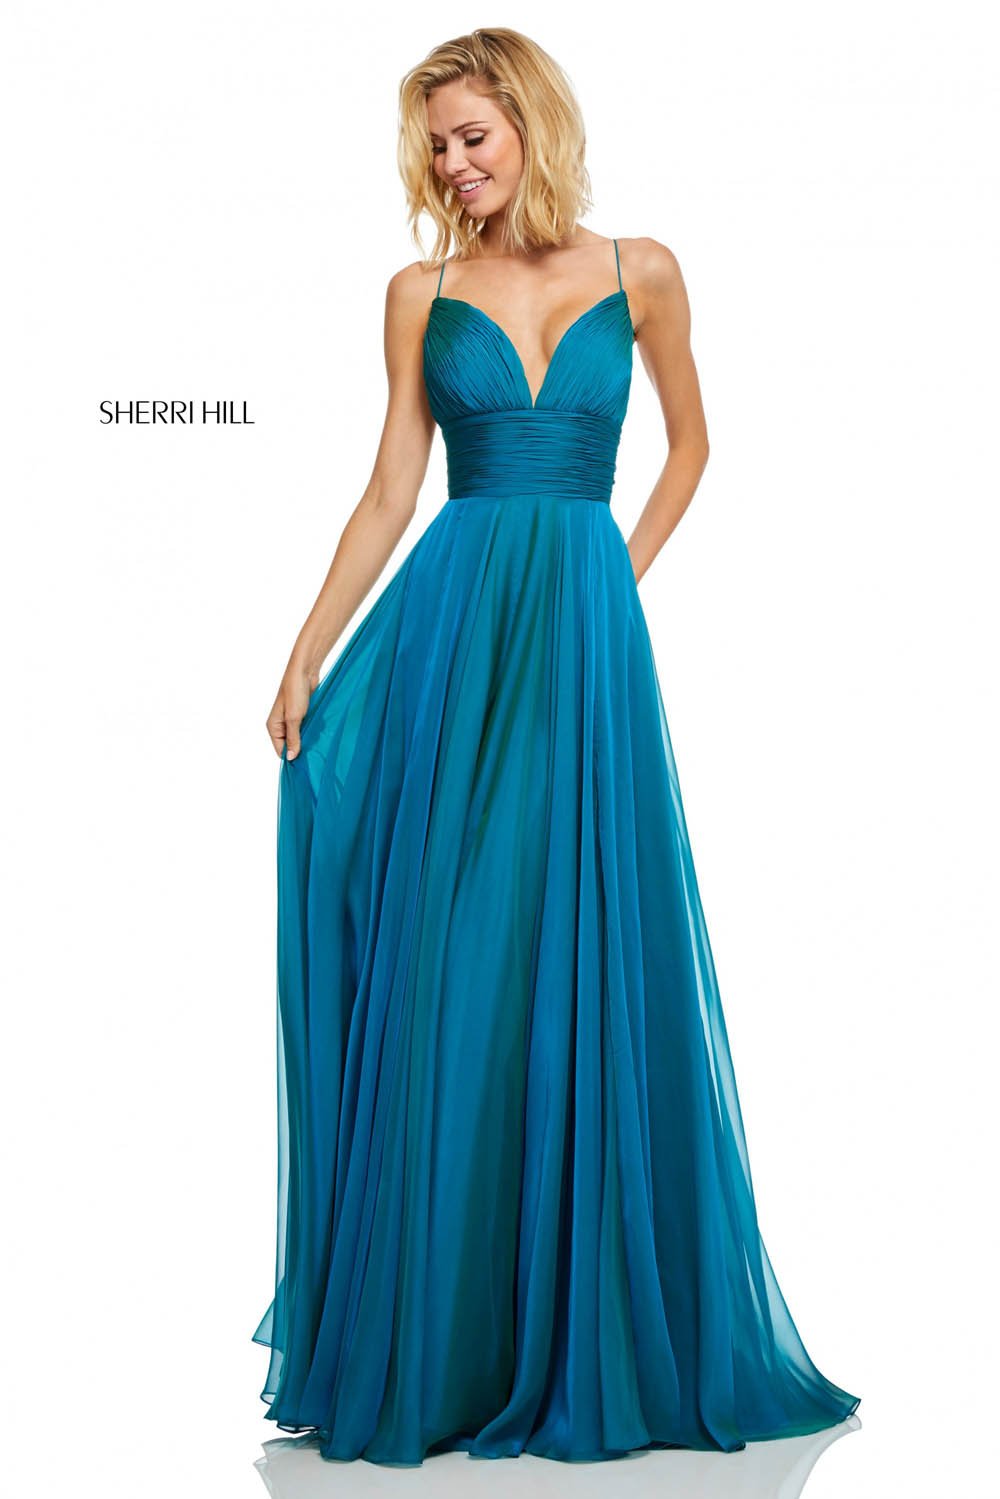 Sherri Hill 52590 dress images in these colors: Peacock, Navy, Yellow, Teal, Burgundy, Eggplant, Gunmetal.